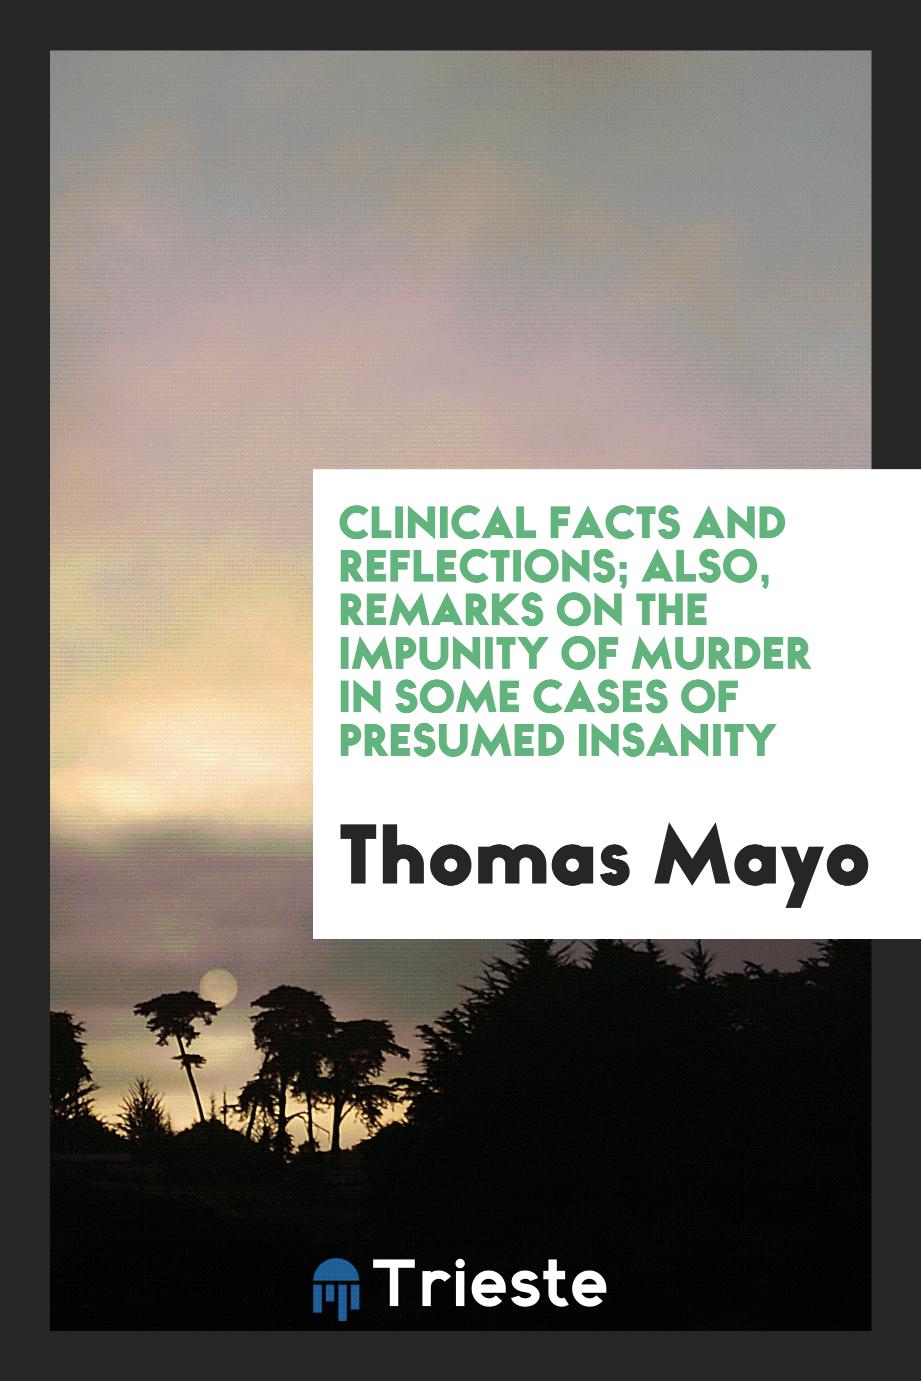 Clinical facts and reflections; also, remarks on the impunity of murder in some cases of presumed insanity